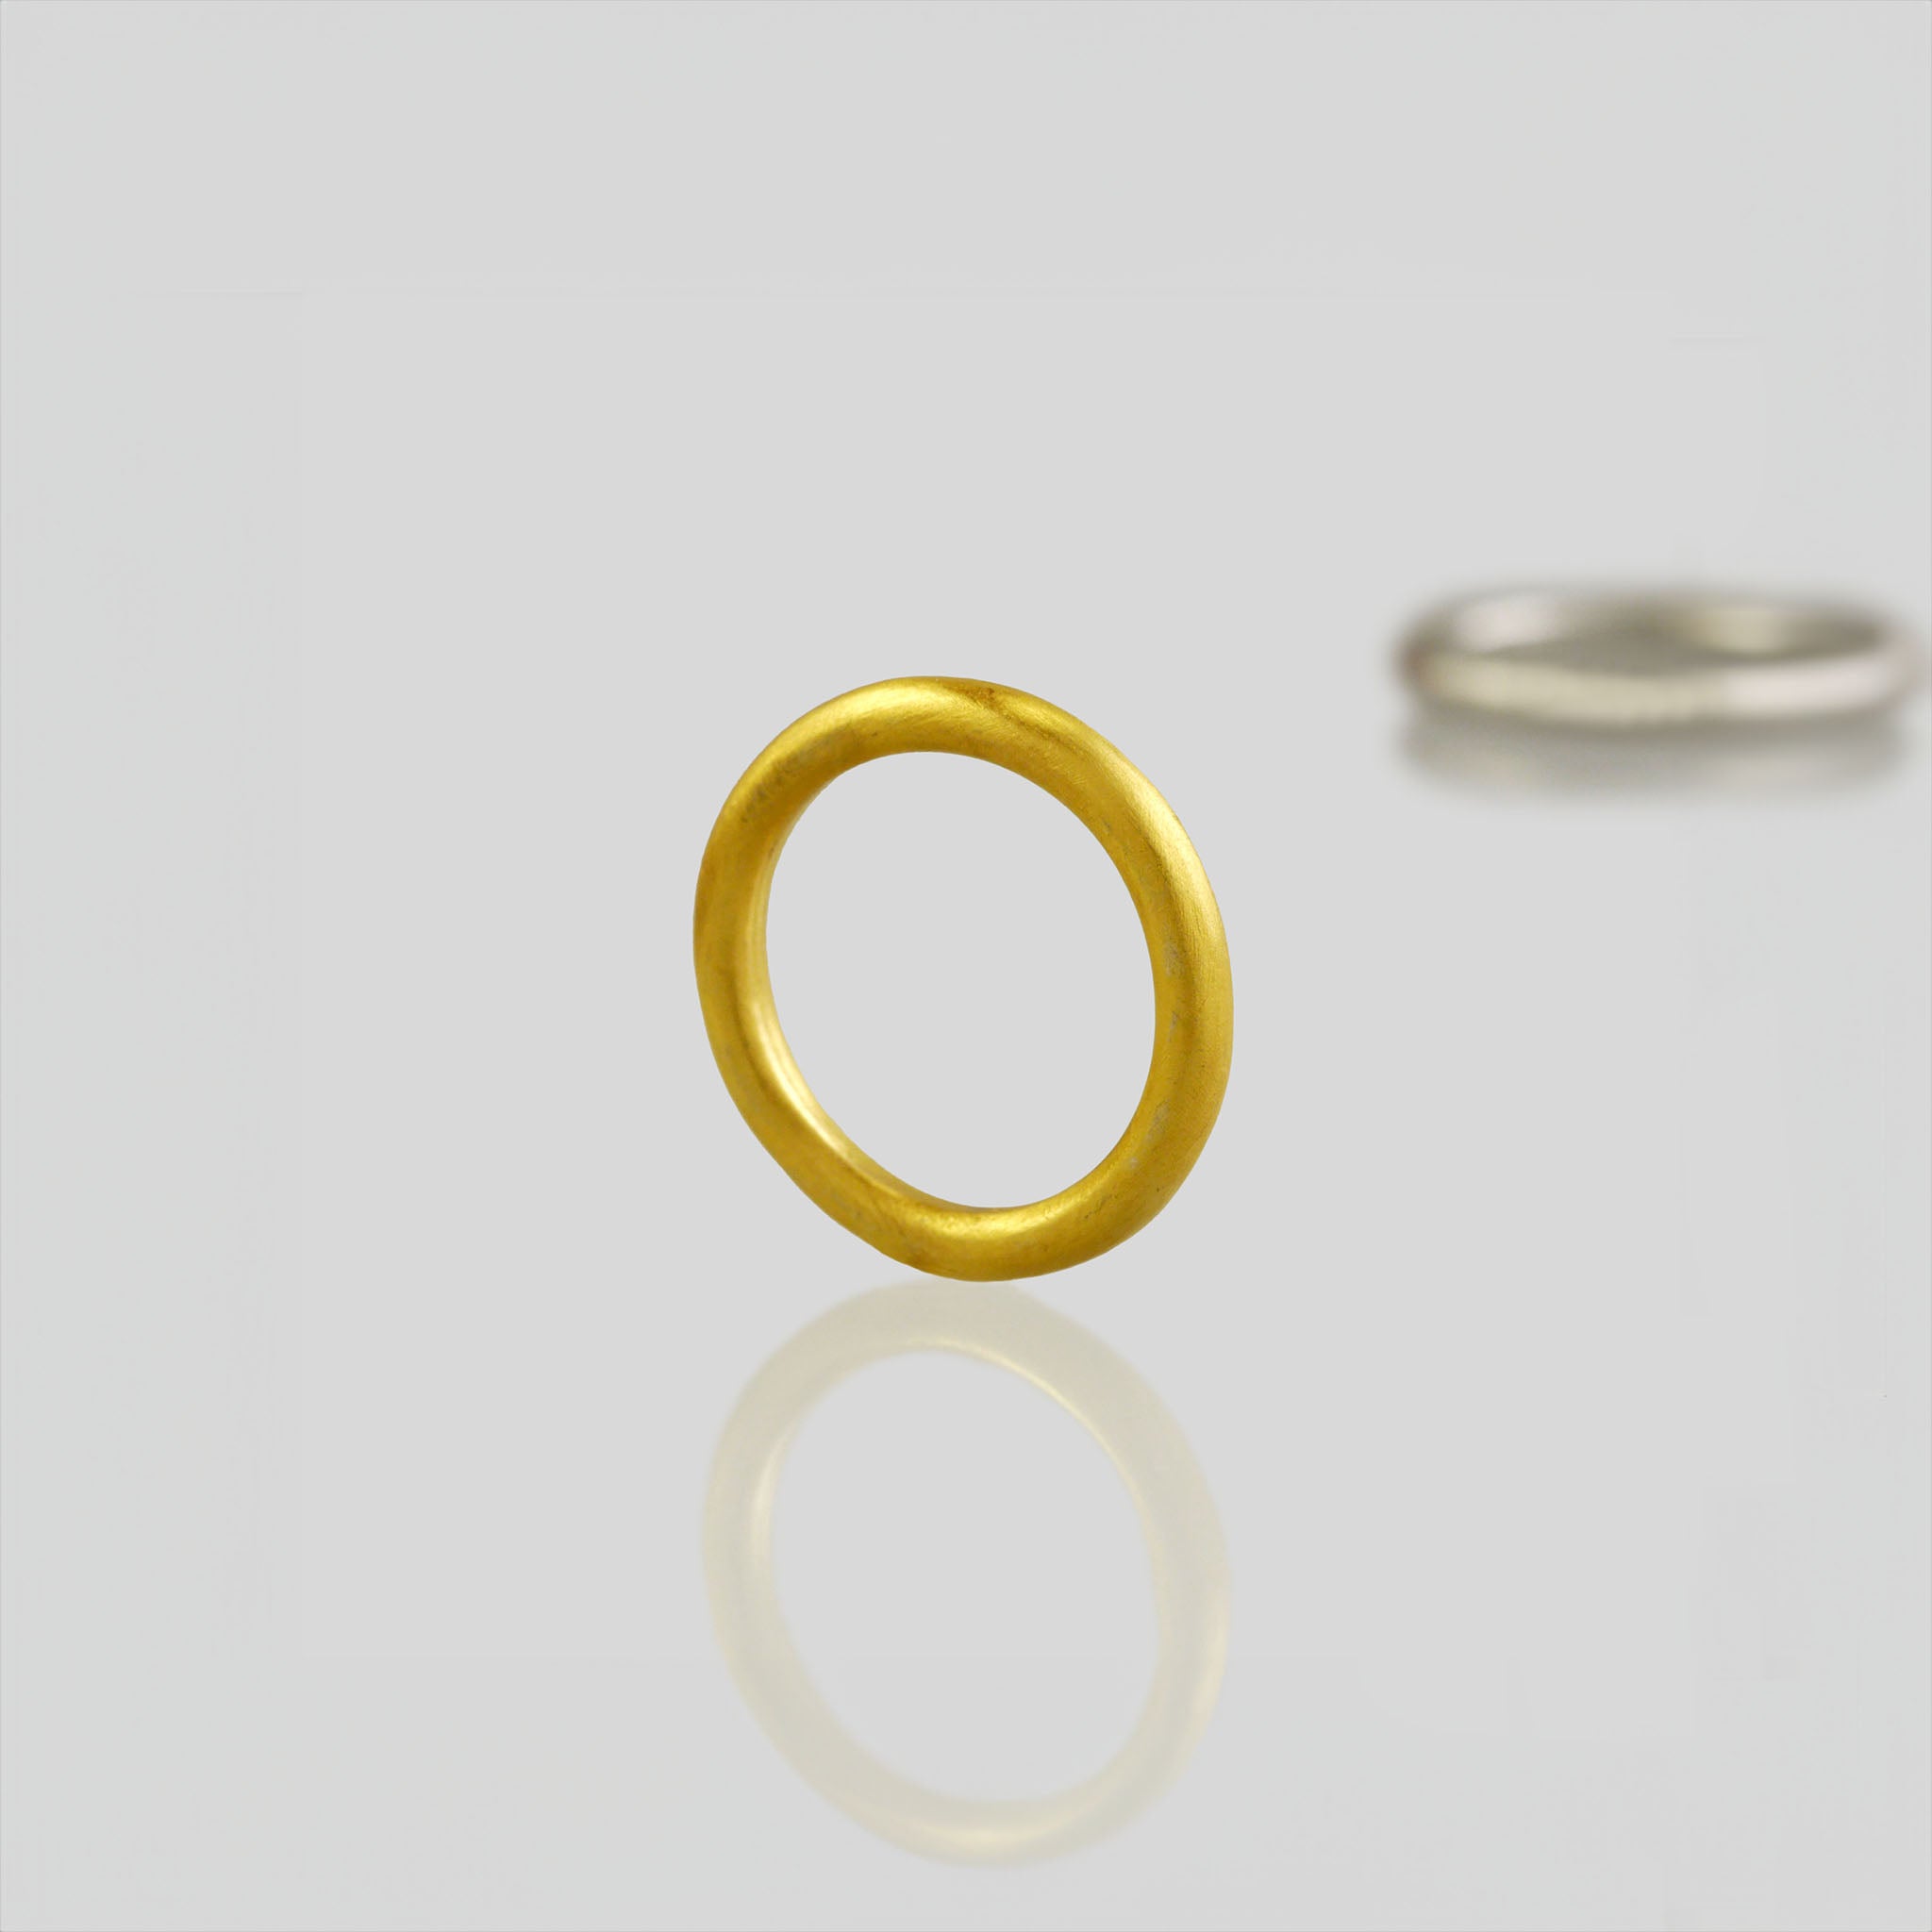 Round profile yellow gold wedding ring with minimalist design, perfect for your special occasion.